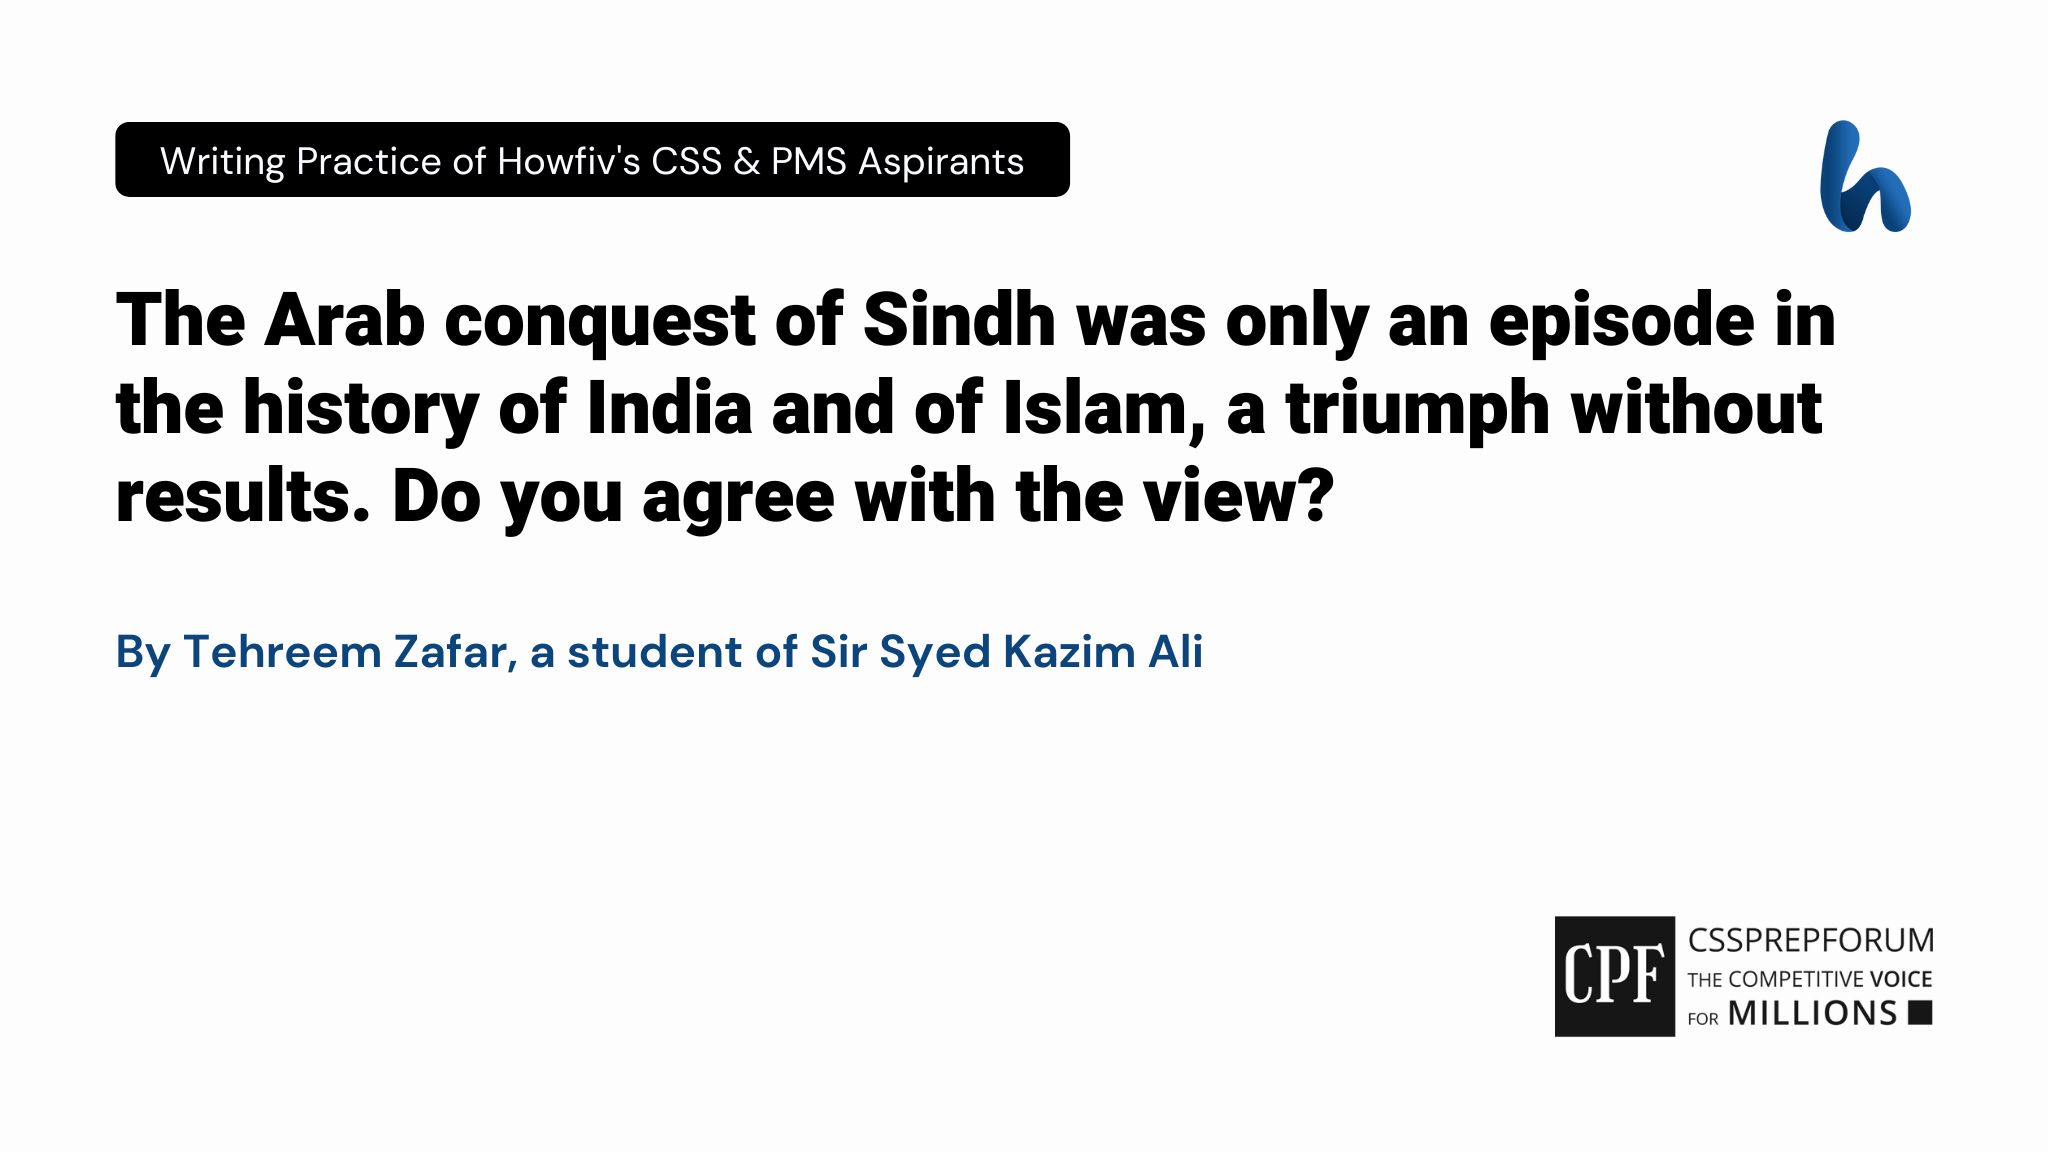 The Arab conquest of Sindh was only an episode in the history of India and of Islam, a triumph without results. Do you agree with the view?